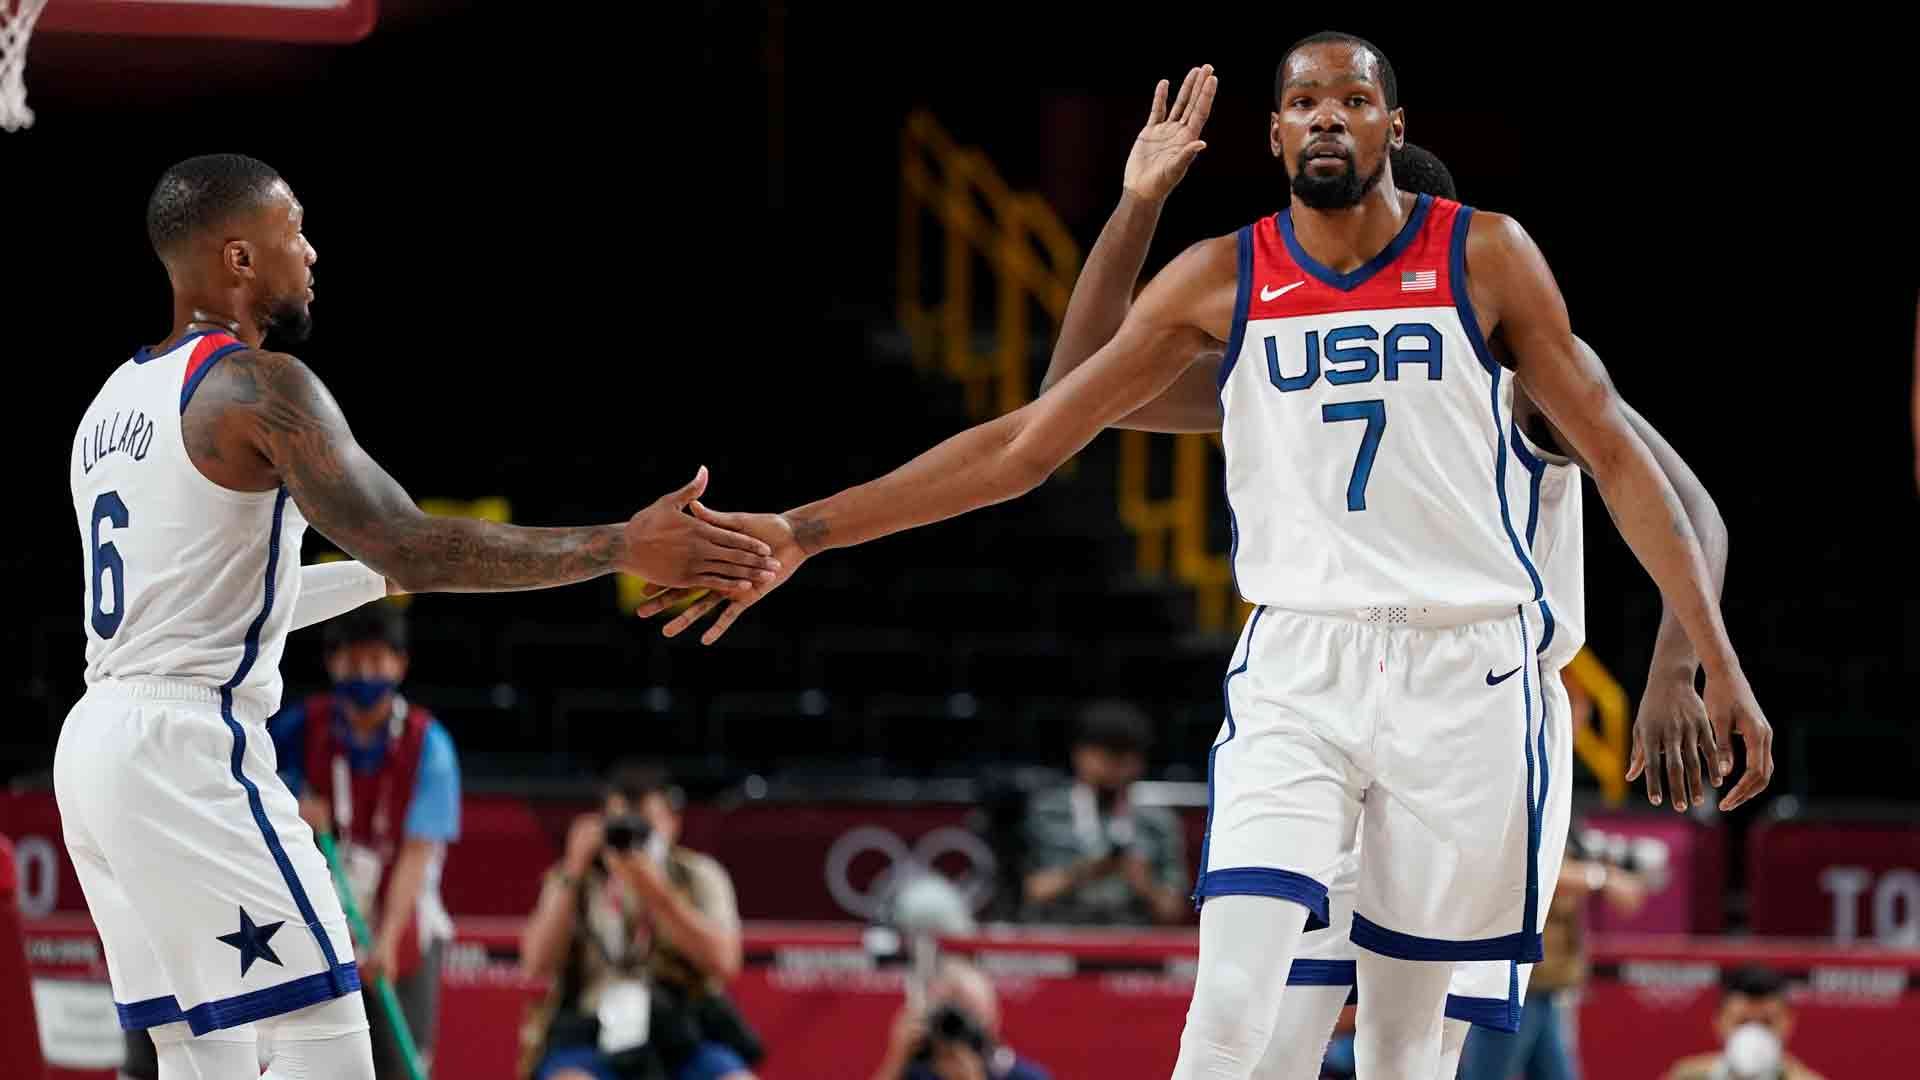 Basketball: Kevin Durant takes USA men's points record in Czech win